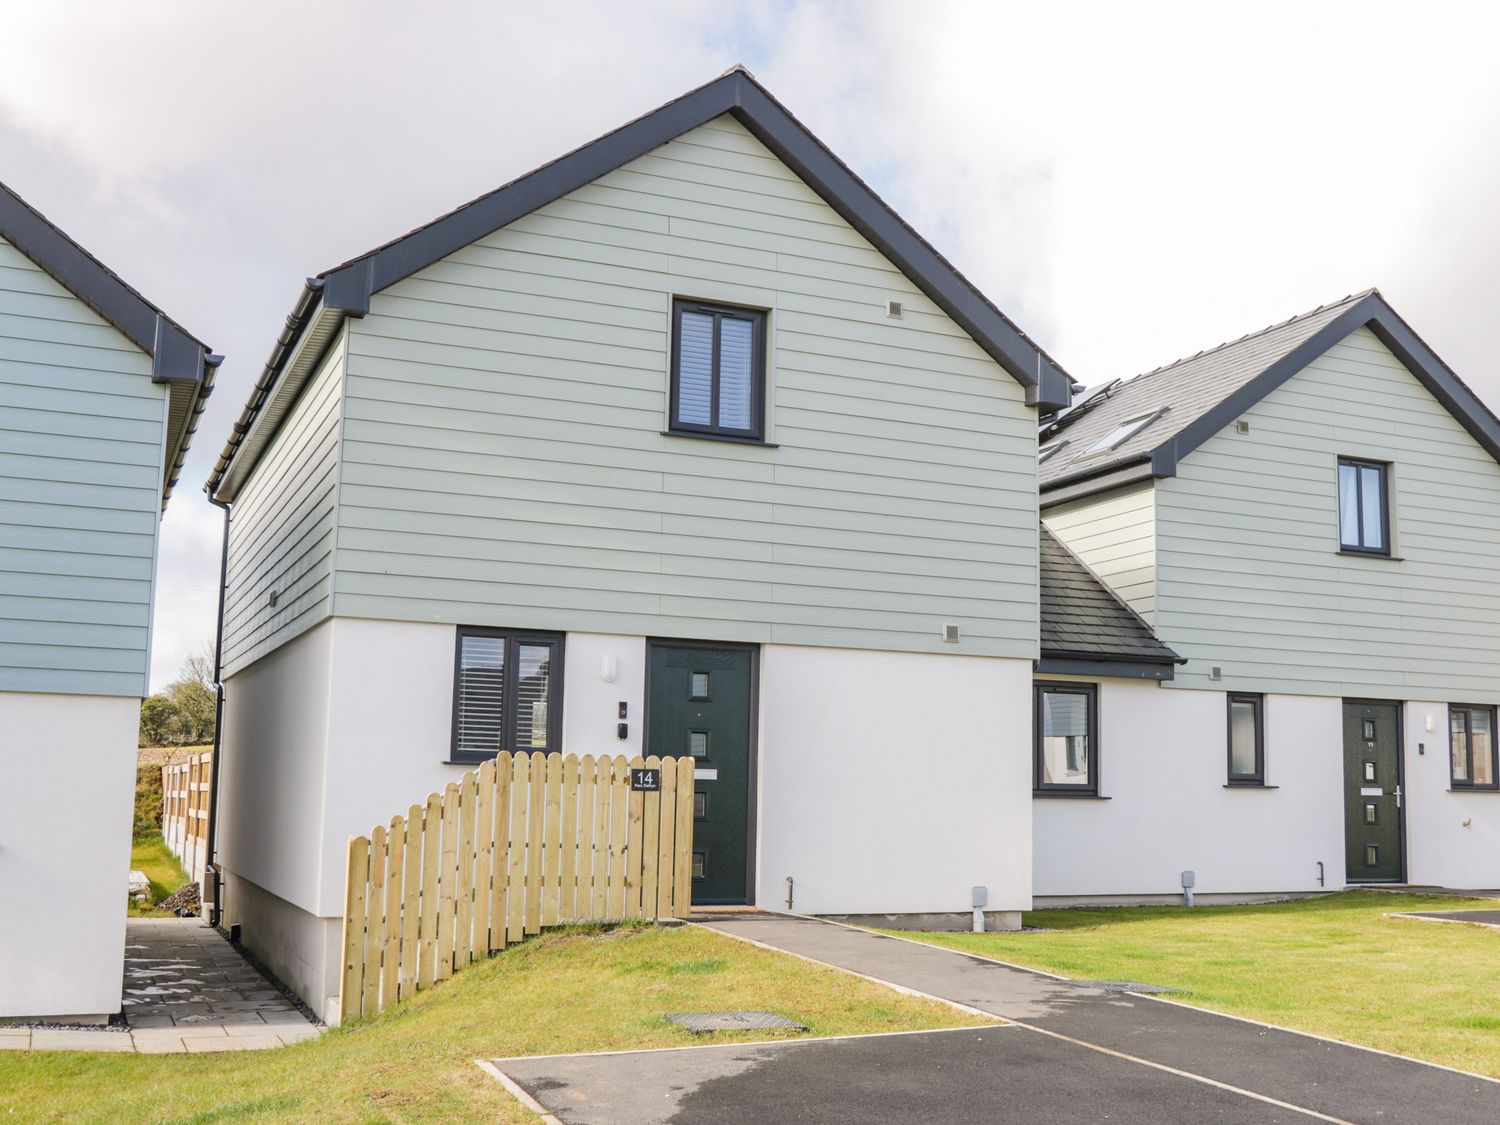 14 Parc Delfryn - Anglesey - 1073129 - photo 1